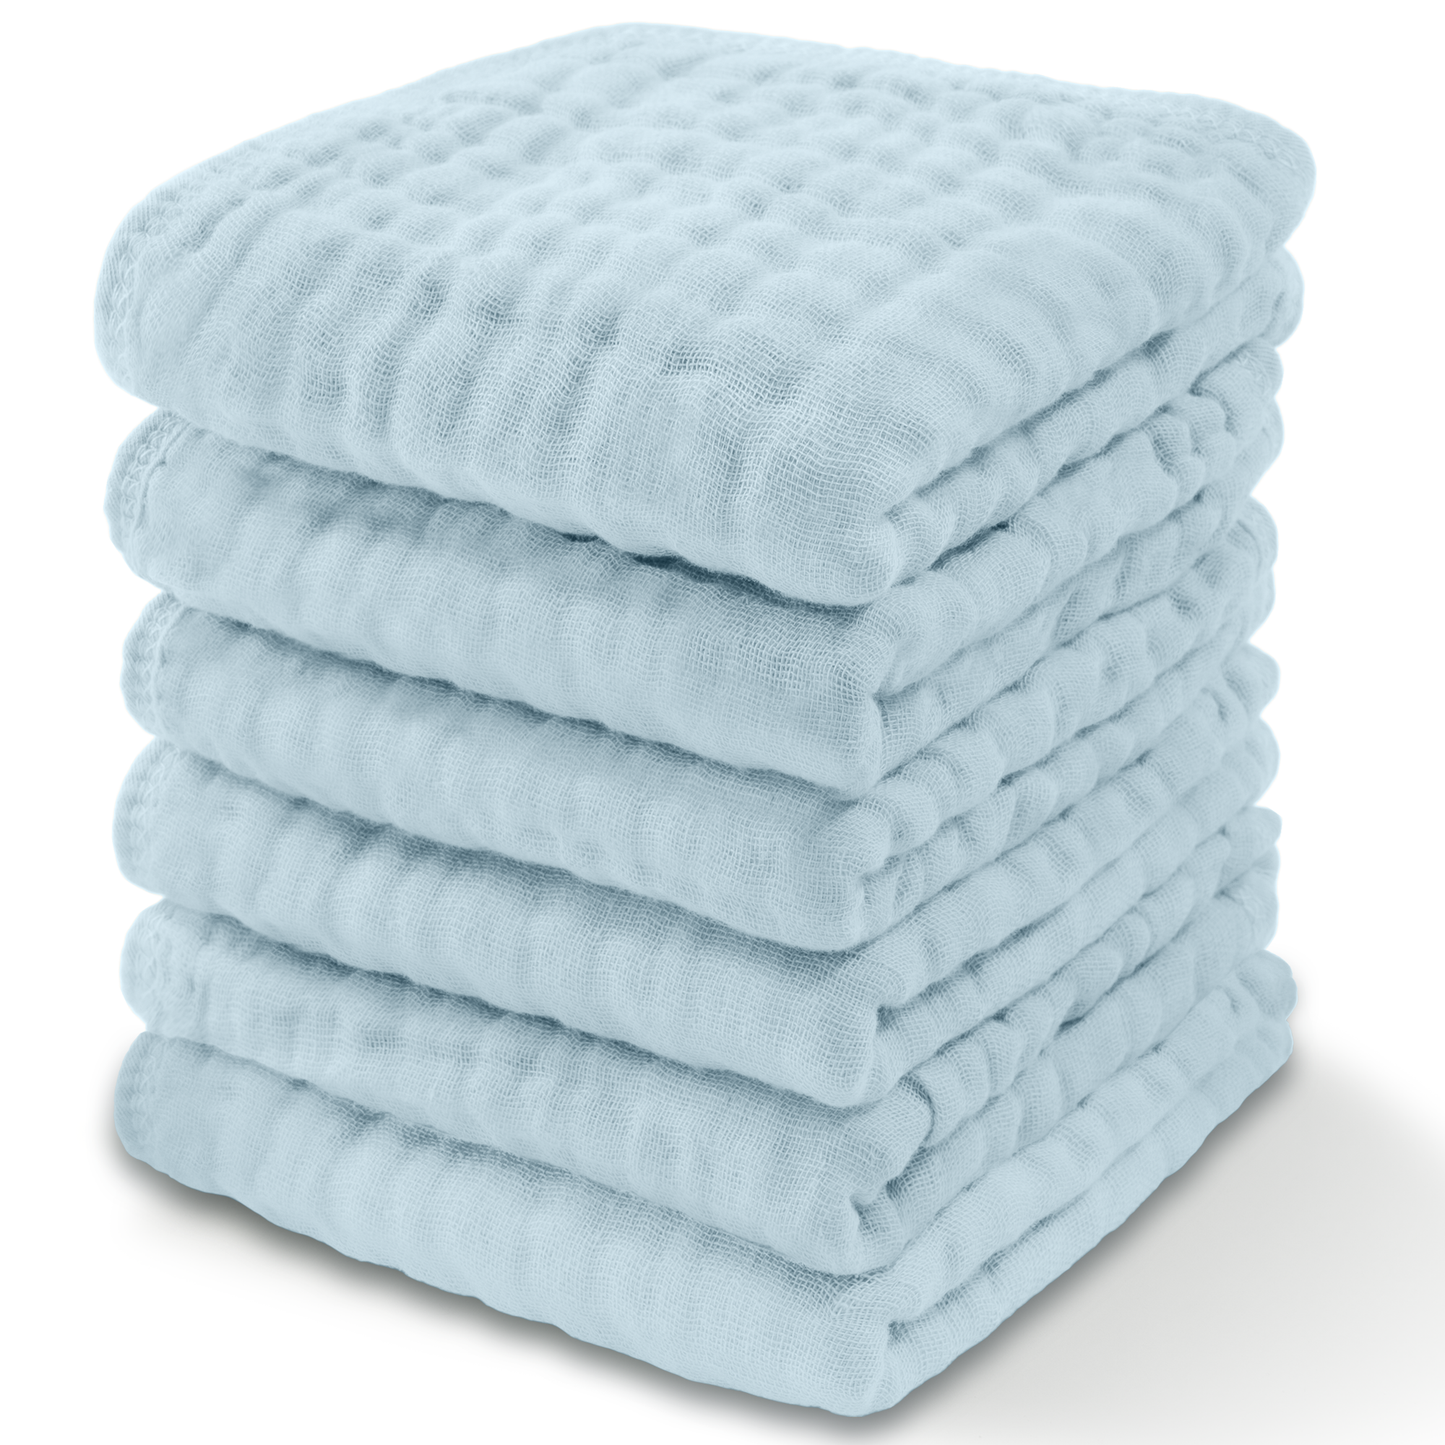 Baby Washcloths 100% Muslin Cotton by Comfy Cubs: Pack of 6 / Pacific Blue